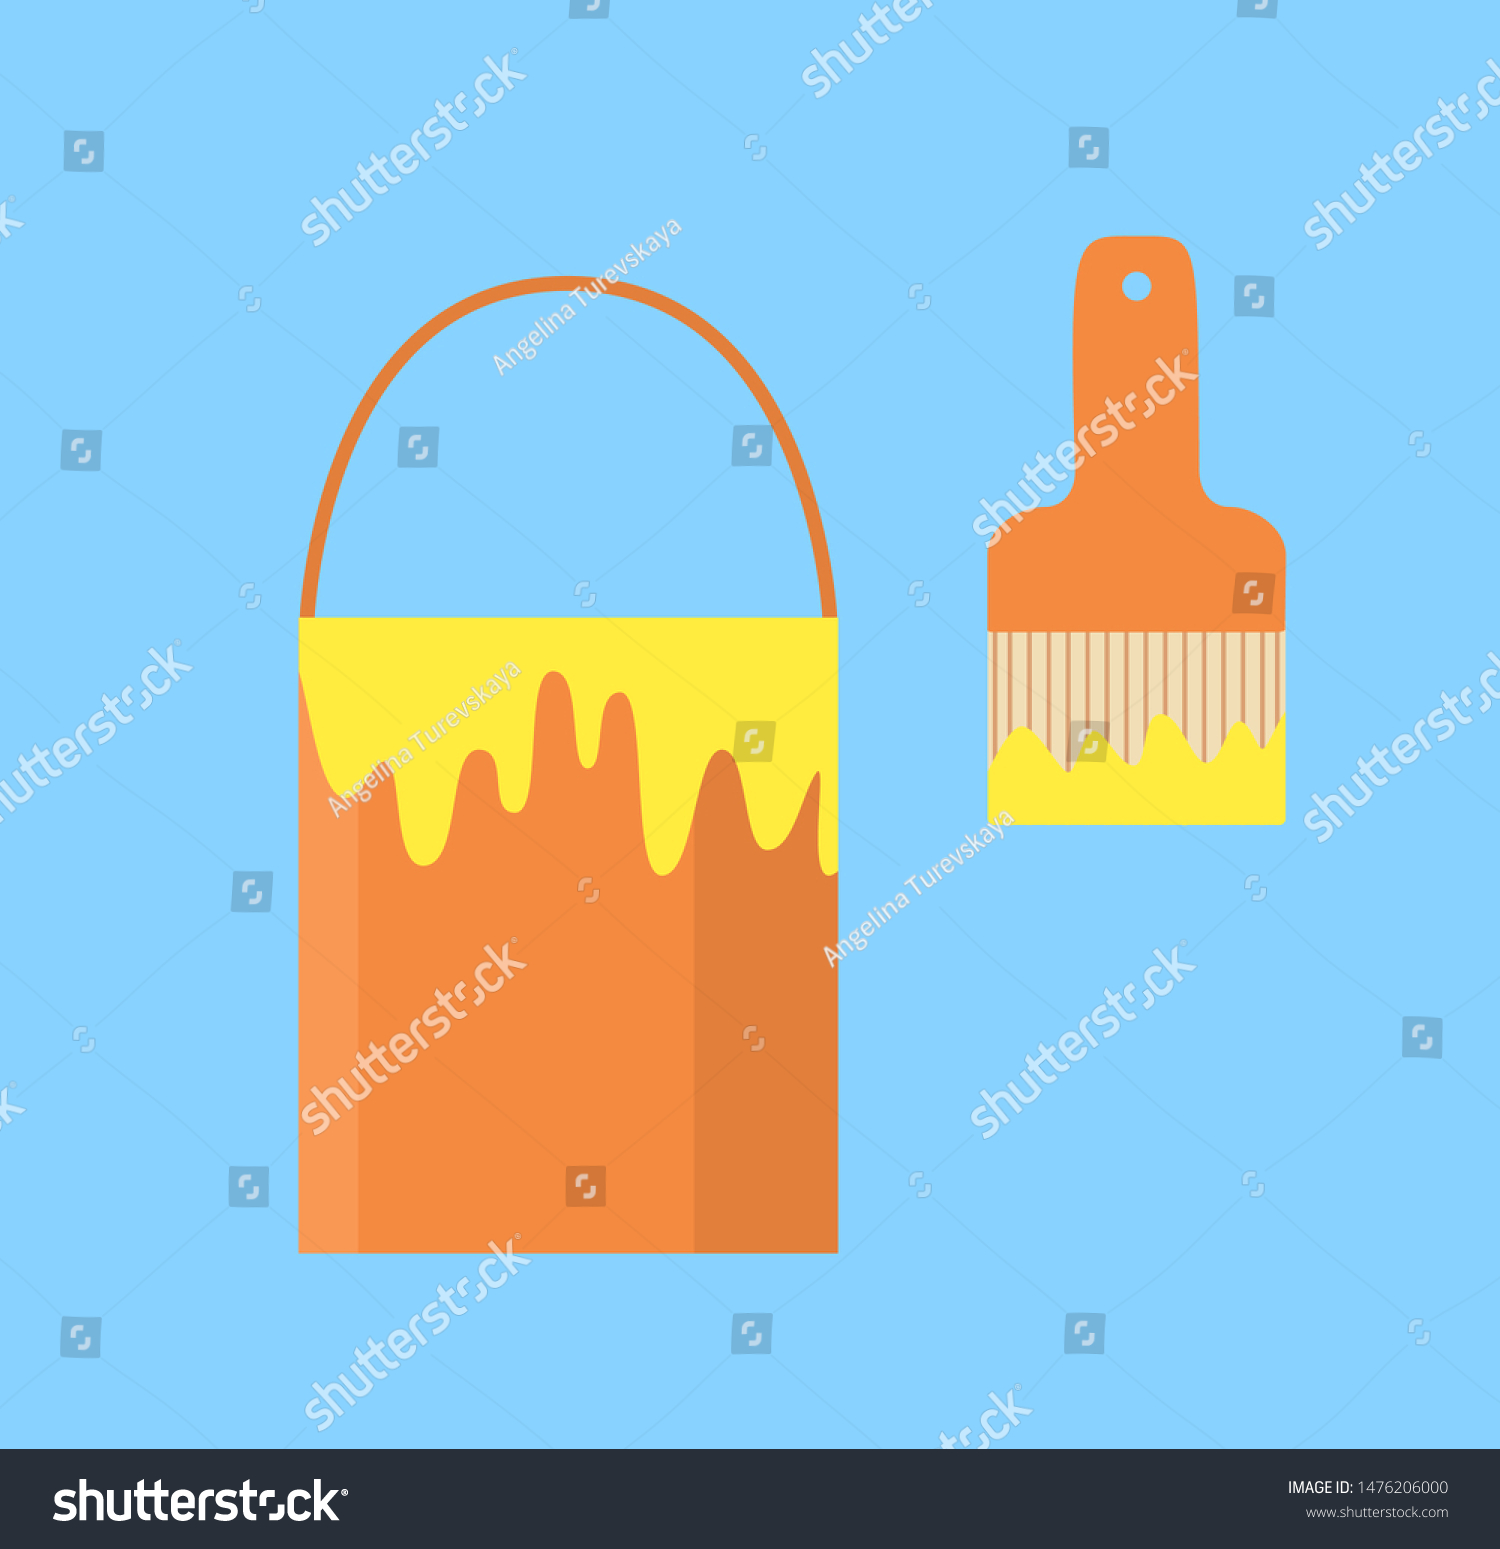 Download Orange Bucket Yellow Paint Paint Brush Stock Vector Royalty Free 1476206000 Yellowimages Mockups